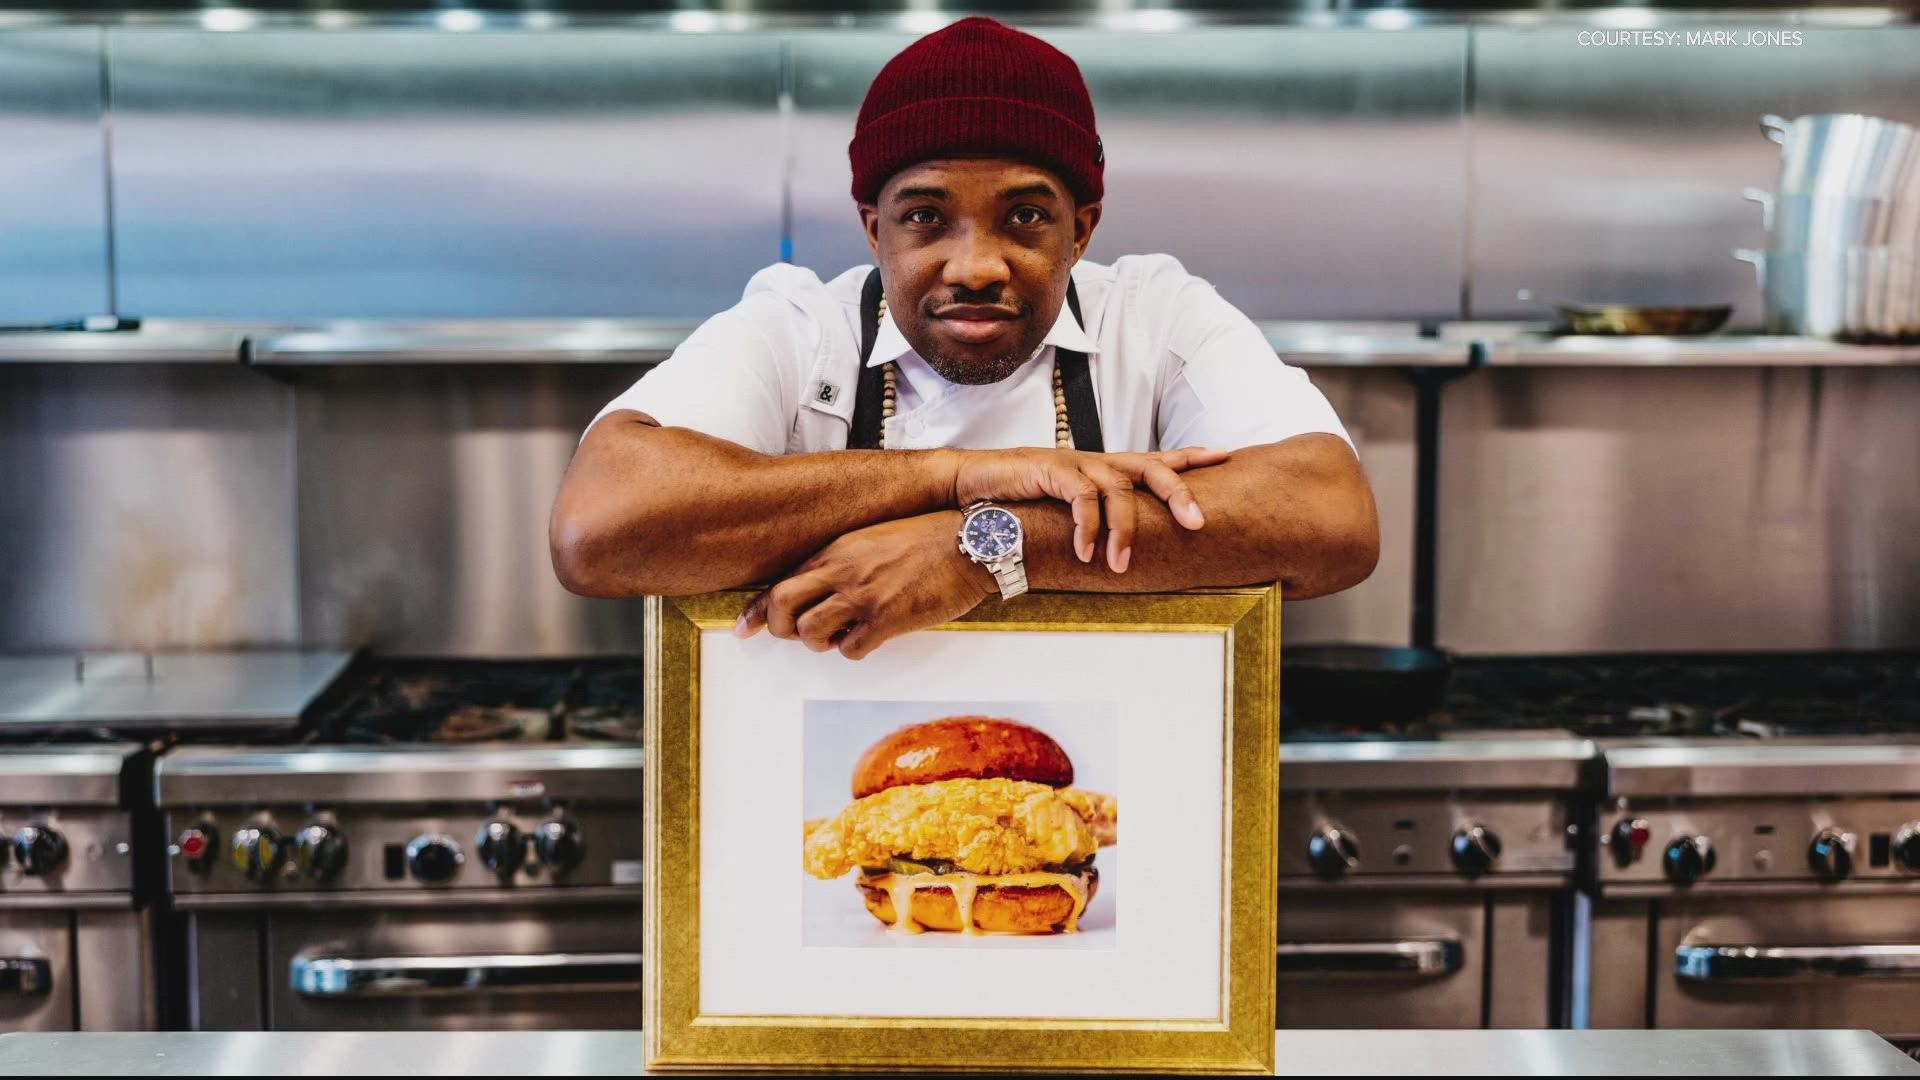 Chef Rock Harper is a semi-finalist in the prestigious James Beard award for Best Chef in the Mid-Atlantic  it's kind of like the Oscar's for the food industry.